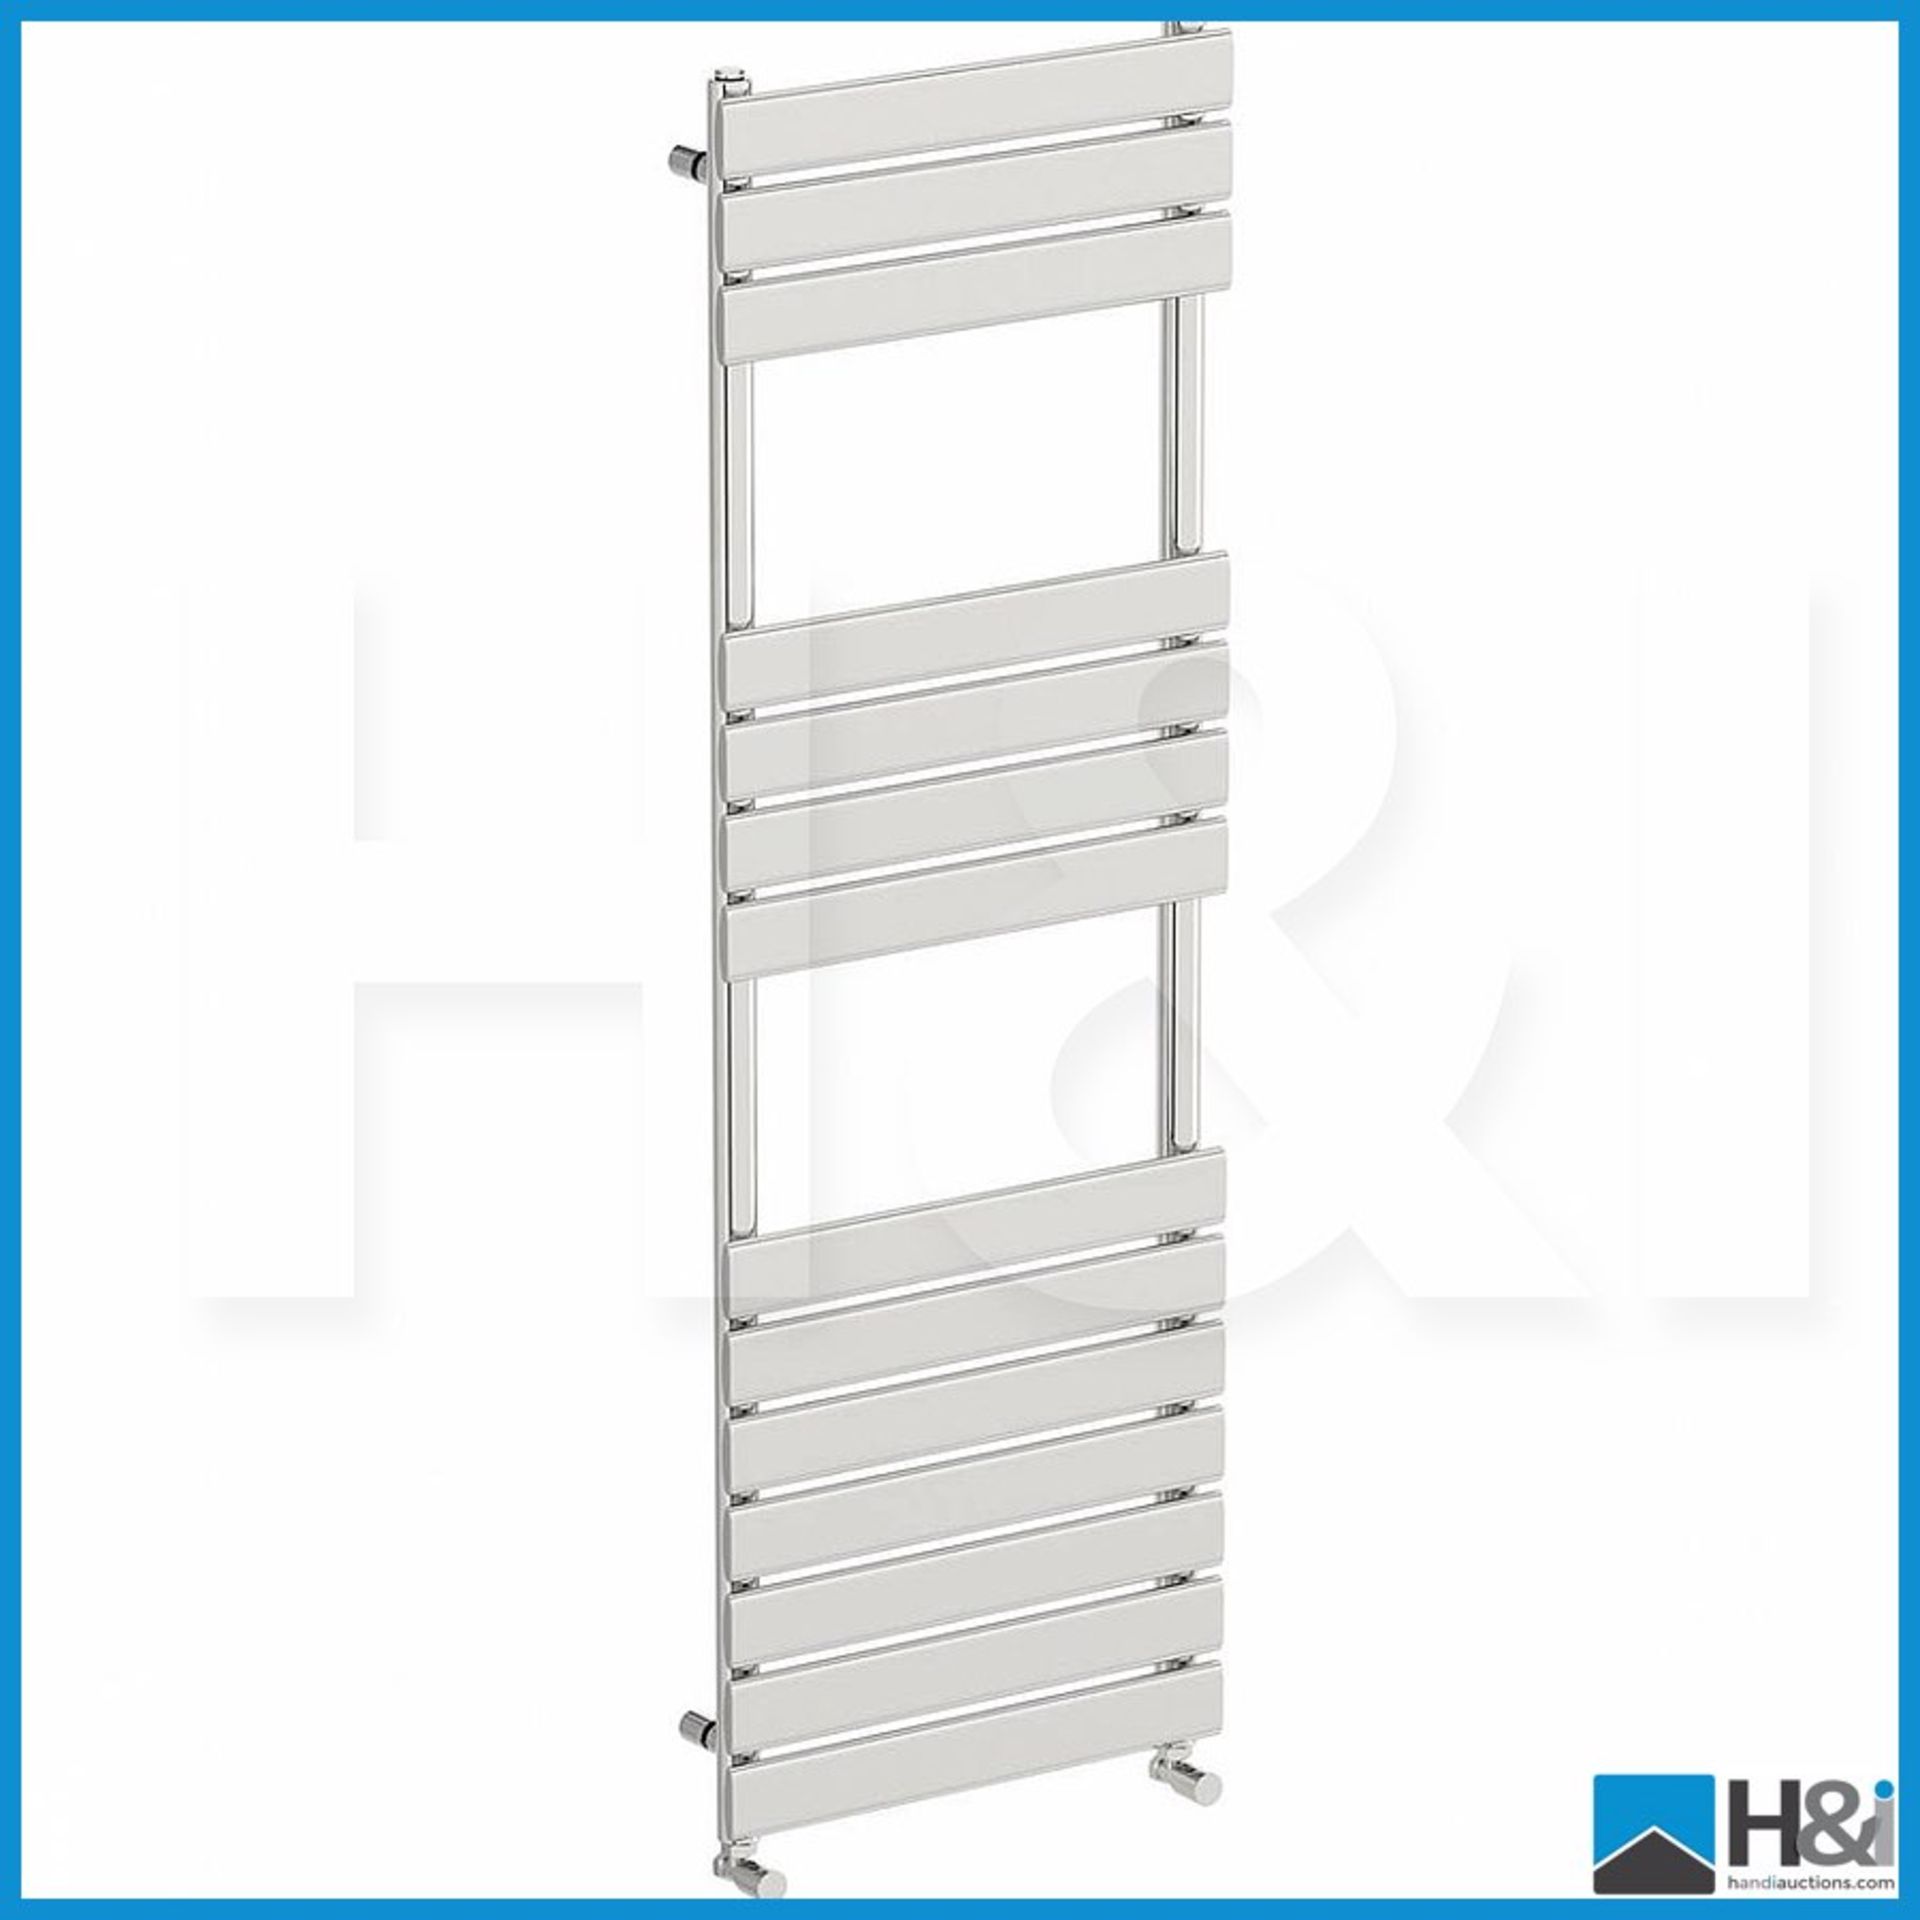 Designer Victoria Plumb TW04 Signelle 1500x500 polished chrome heated towel rail. New and boxed.